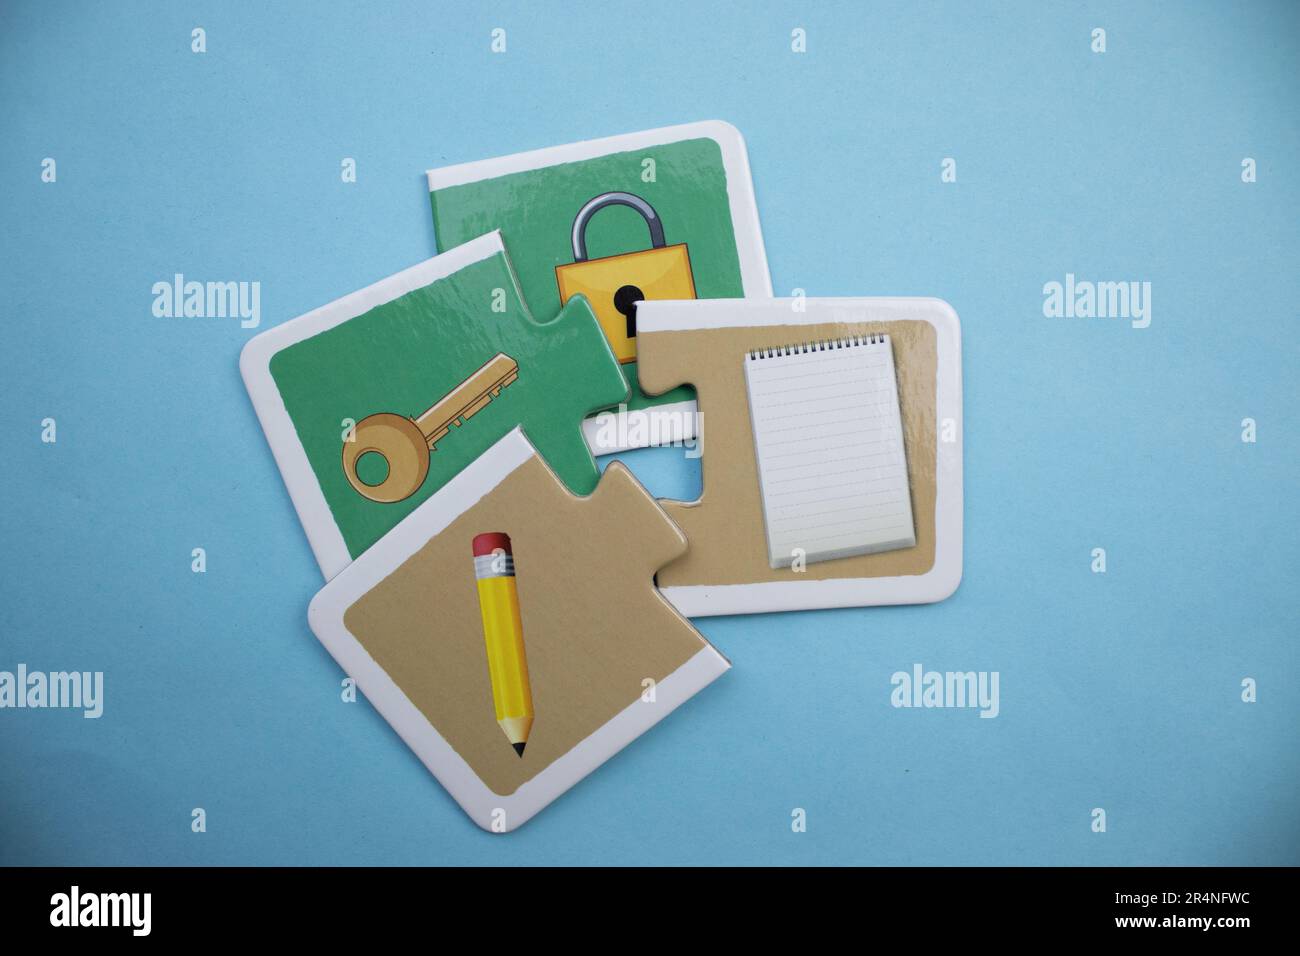 Picture puzzles superimposed on a blue background. Pen, notebook, key and lock. Mixed. Stock Photo